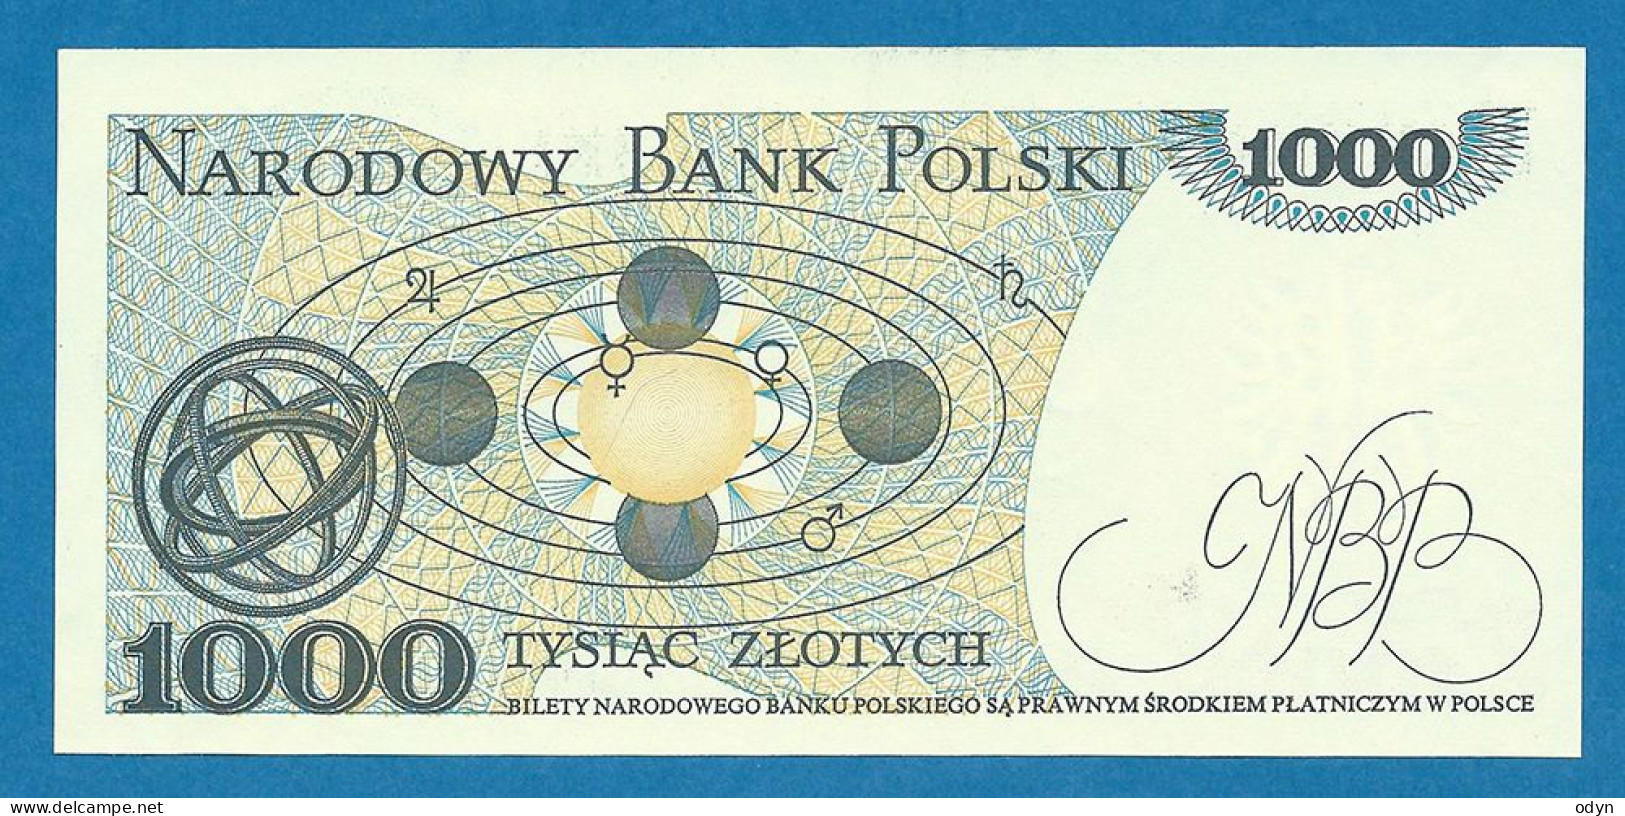 Poland, 1982, 1986, 1988; lot of 11 banknotes 20, 50, 500 and 1000 zlotych, UNC, -UNC, AU - see description